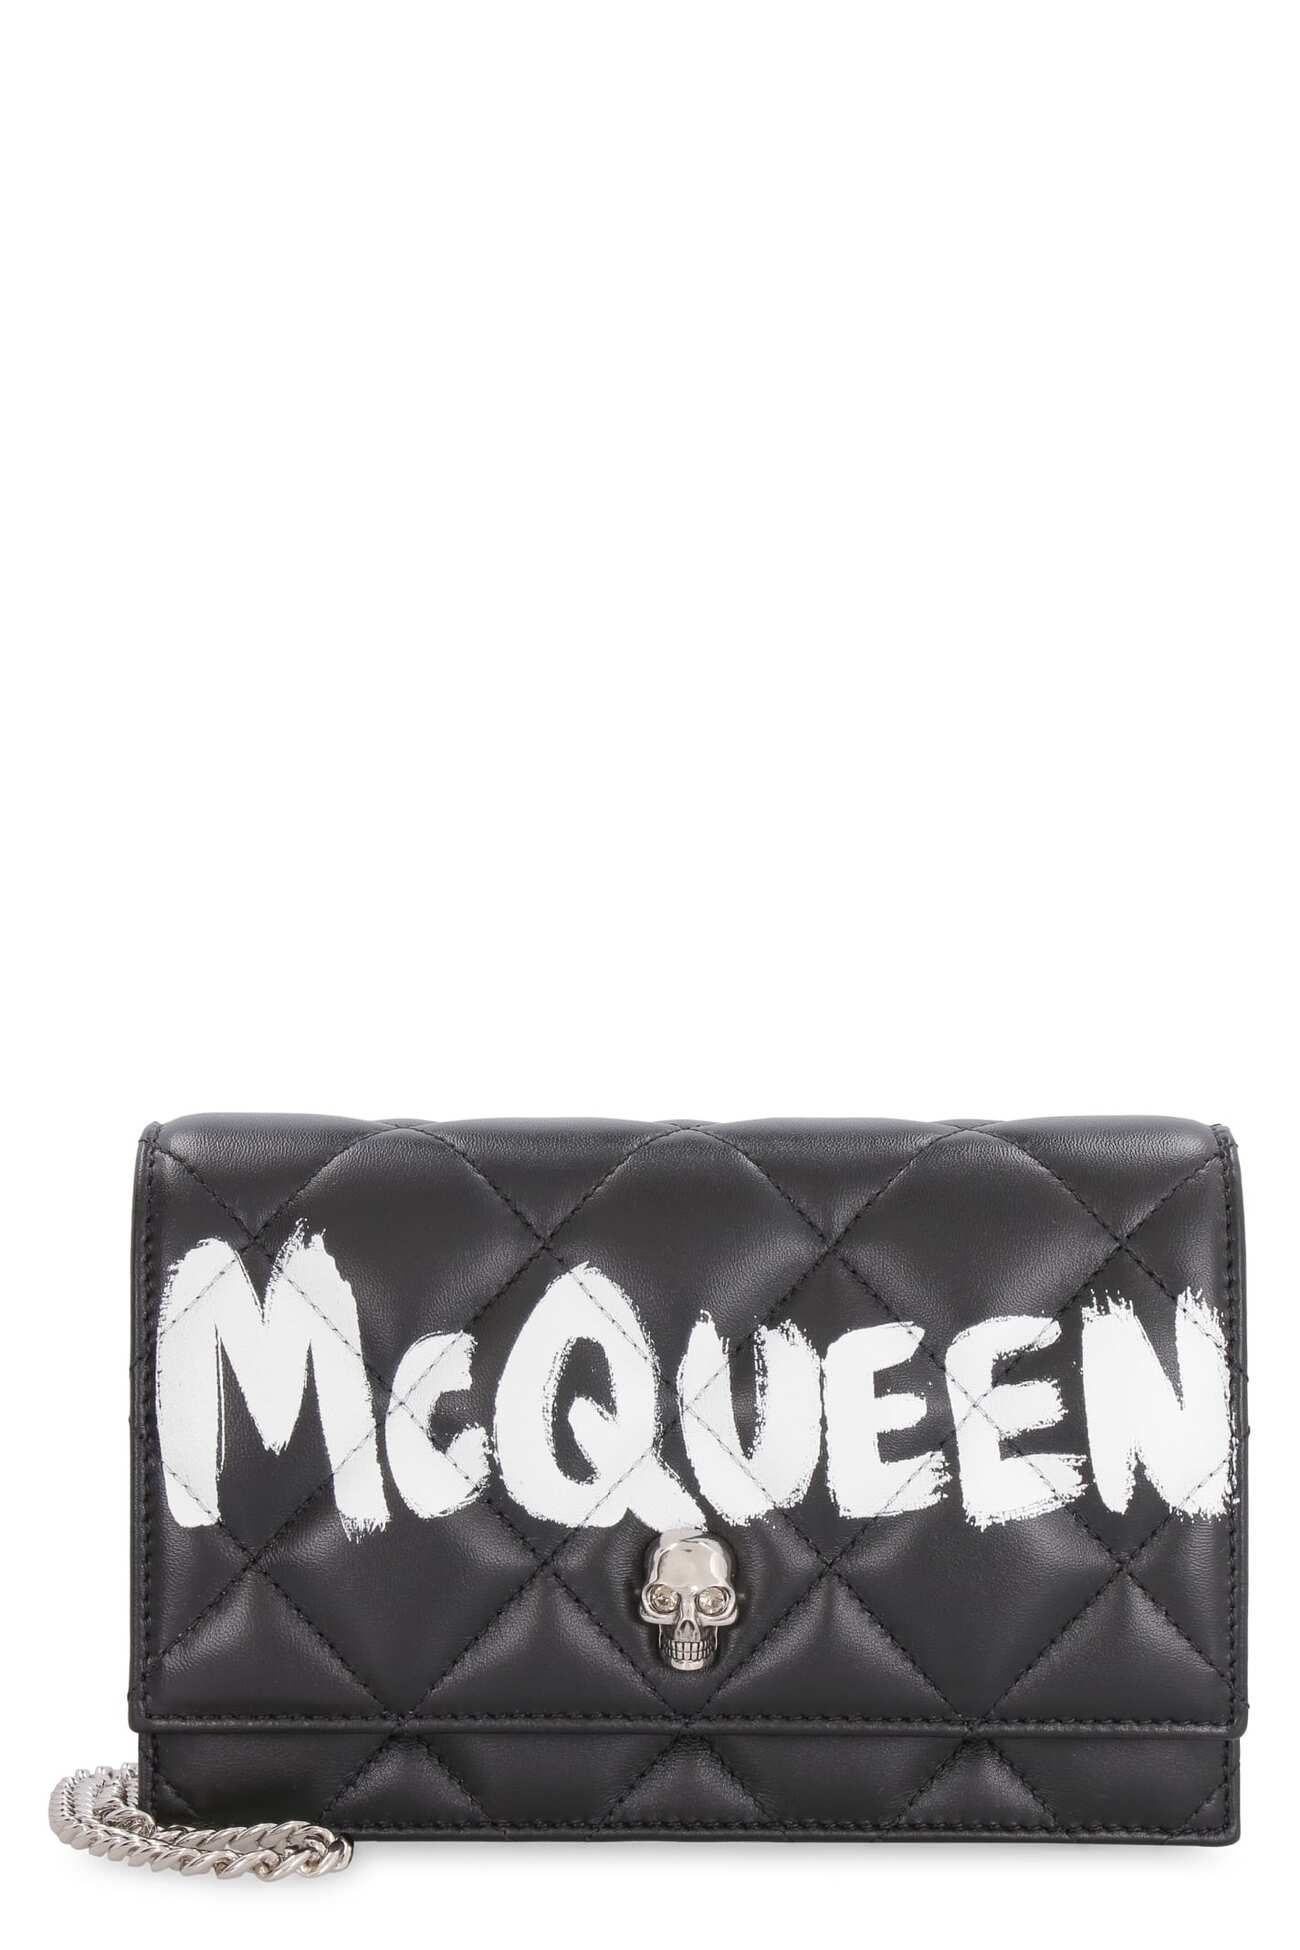 Alexander McQueen Skull Leather Clutch With Strap in black